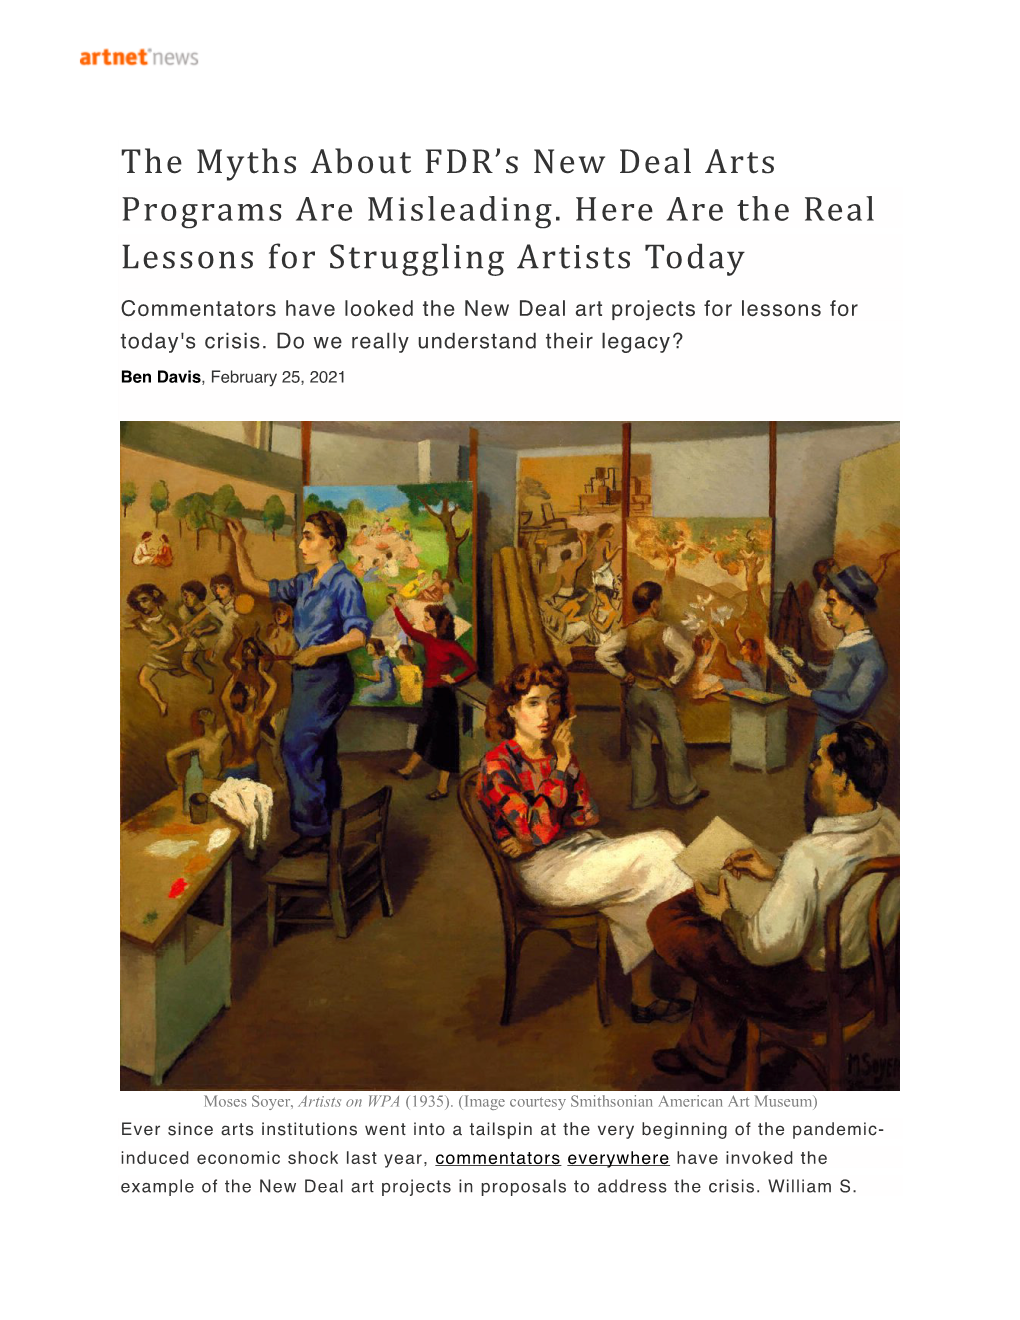 The Myths About FDR's New Deal Arts Programs Are